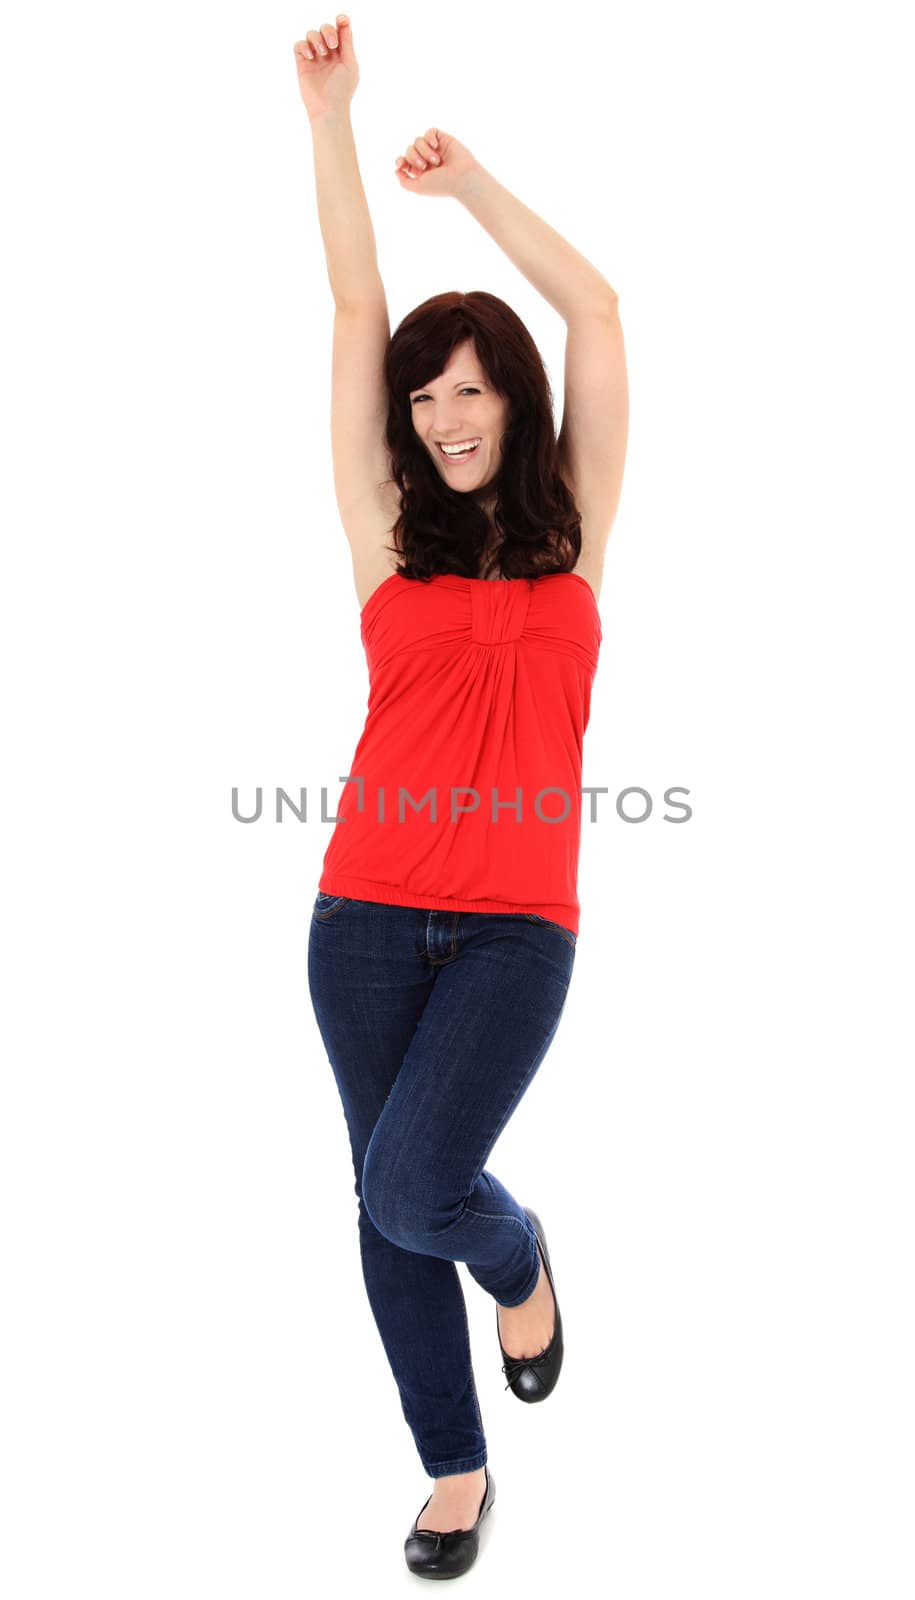 Cheering young woman. All on white background.